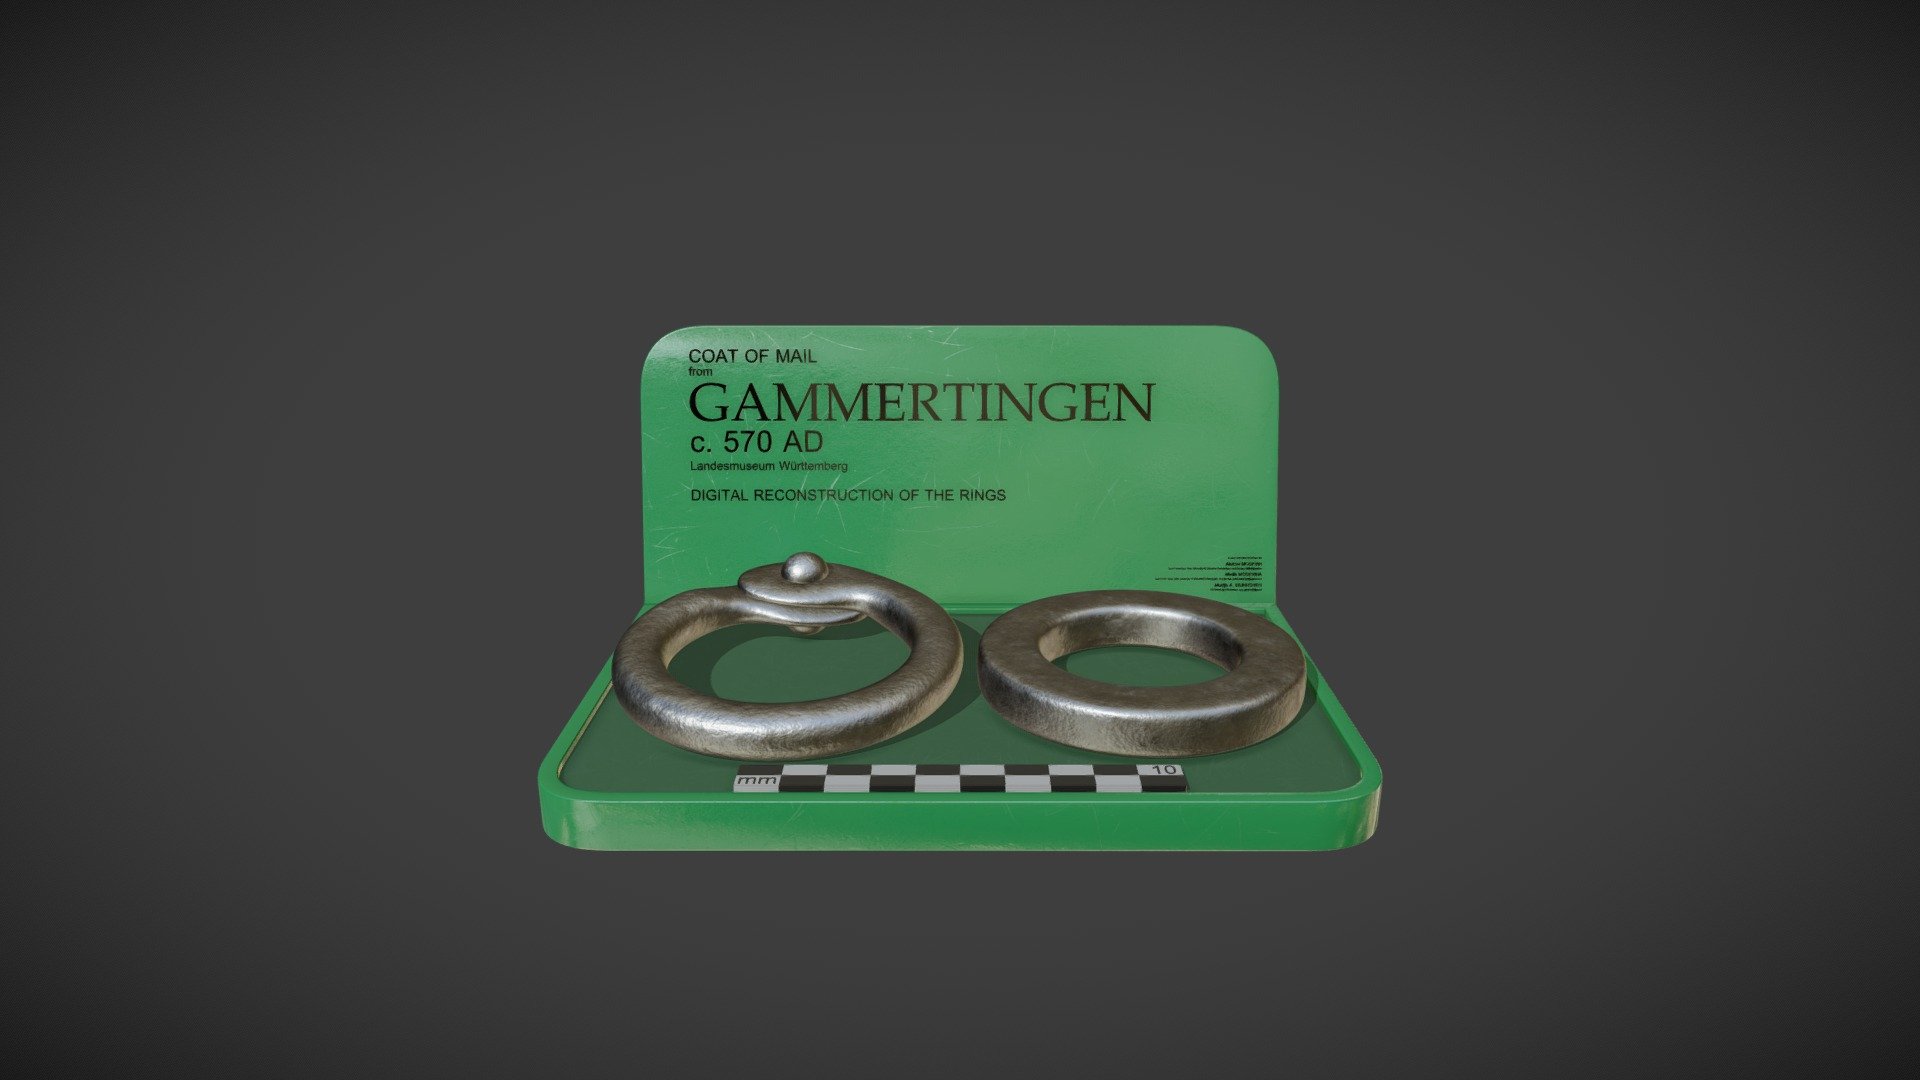 The 3D model presents a digital reconstruction of solid and riveted rings of archaeological mail armour. 
Location: Landesmuseum Württemberg https://www.landesmuseum-stuttgart.de/ 
https://sketchfab.com/lmwstuttgart

To create 3D models of the rings, we used polygonal modelling functions of Blender software. In order to record the relevant measurements of the mail rings, we used a list of parameters. This list includes 11 parameters for a riveted ring and four parameters for a solid ring. The accuracy of the digital replicas of the rings was 0.01 mm. The authors of the reconstructions are 

Aleksei Moskvin (Saint Petersburg State University of Industrial Technologies and Design) 
https://independent.academia.edu/AlekseiMoskvin

Mariia Moskvina (Saint Petersburg State University of Industrial Technologies and Design) https://independent.academia.edu/MariiaMoskvina

and Martijn A. Wijnhoven (VU University Amsterdam) 
https://vu-nl.academia.edu/MartijnAWijnhoven 

DOI: https://doi.org/10.13140/RG.2.2.19005.38884 - Armour from Gammertingen: 3D reconstruction - Download Free 3D model by Aleksei Moskvin (@alekseimoskvin1) 3d model